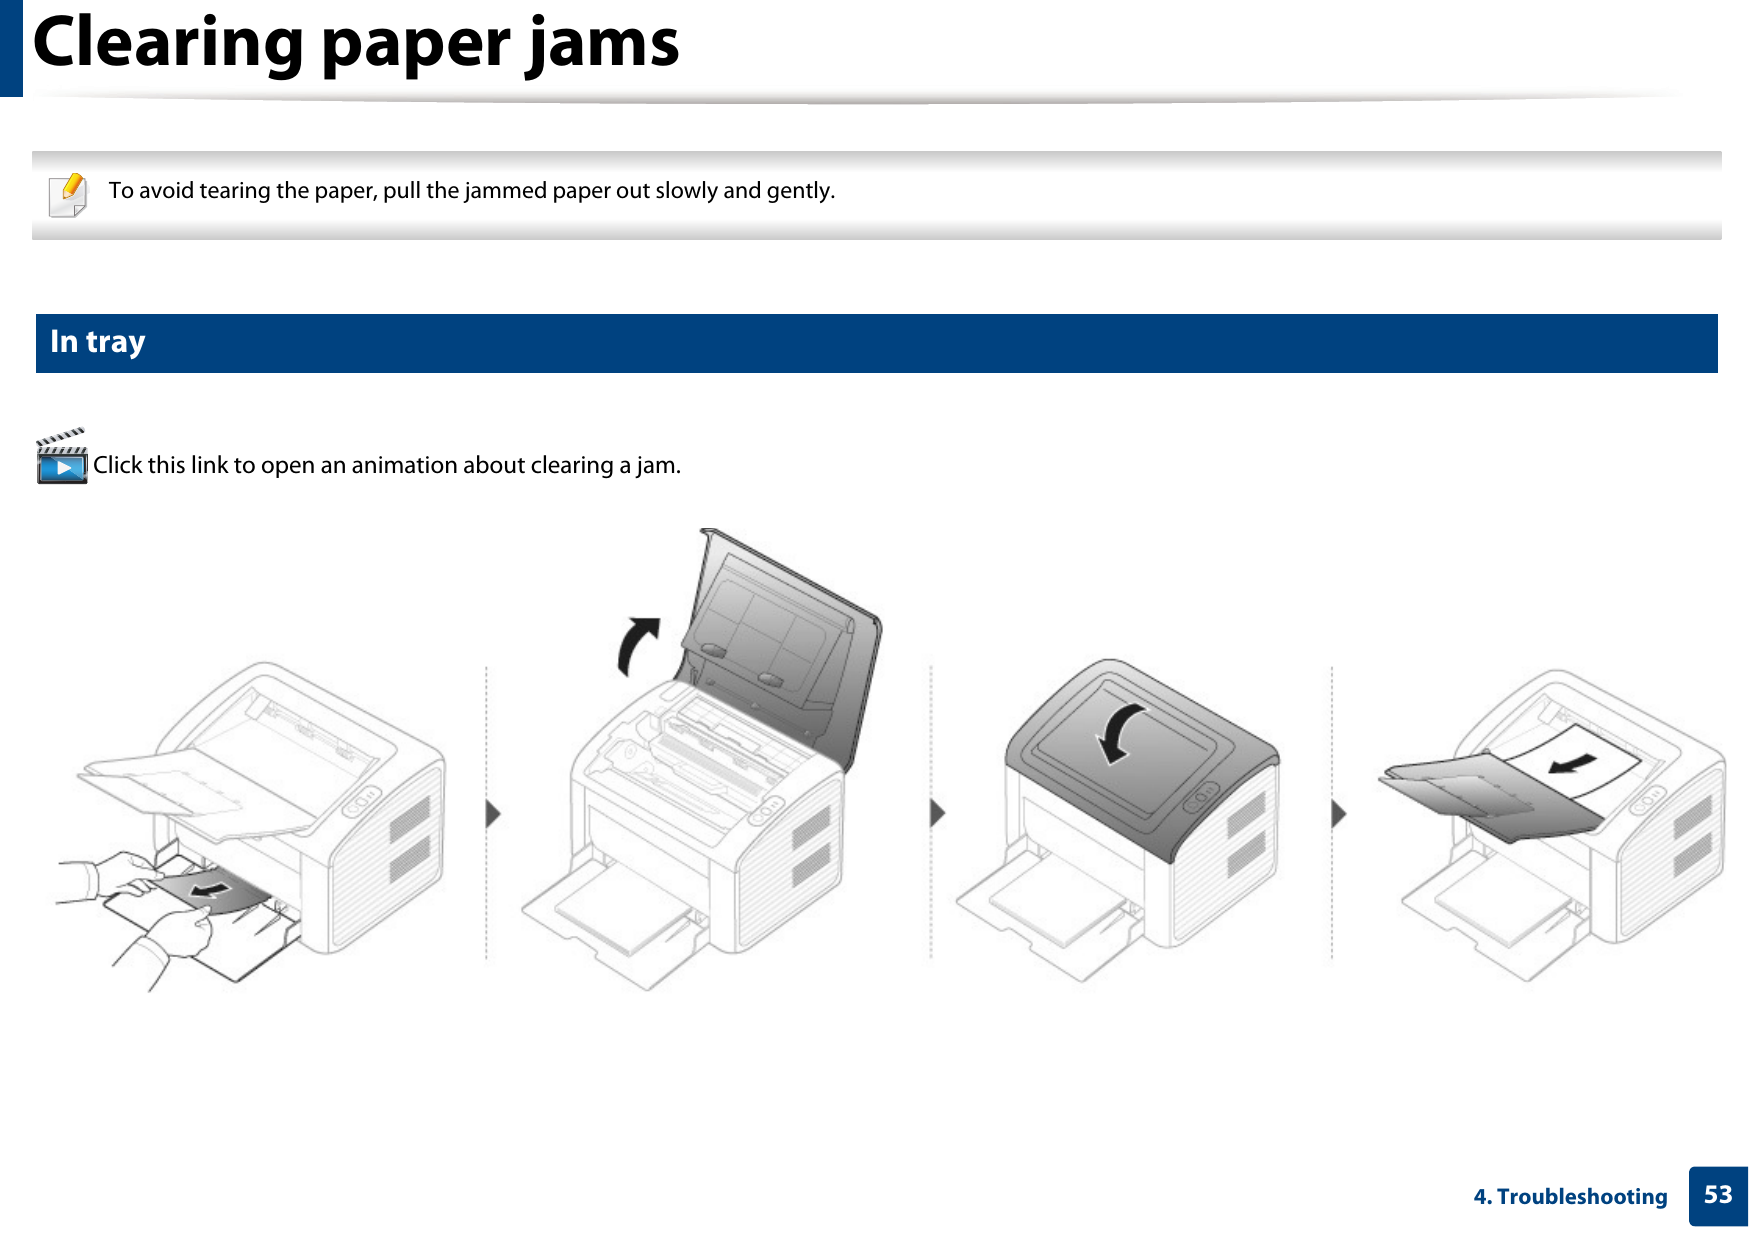 534. TroubleshootingClearing paper jams To avoid tearing the paper, pull the jammed paper out slowly and gently.  1 In tray Click this link to open an animation about clearing a jam.